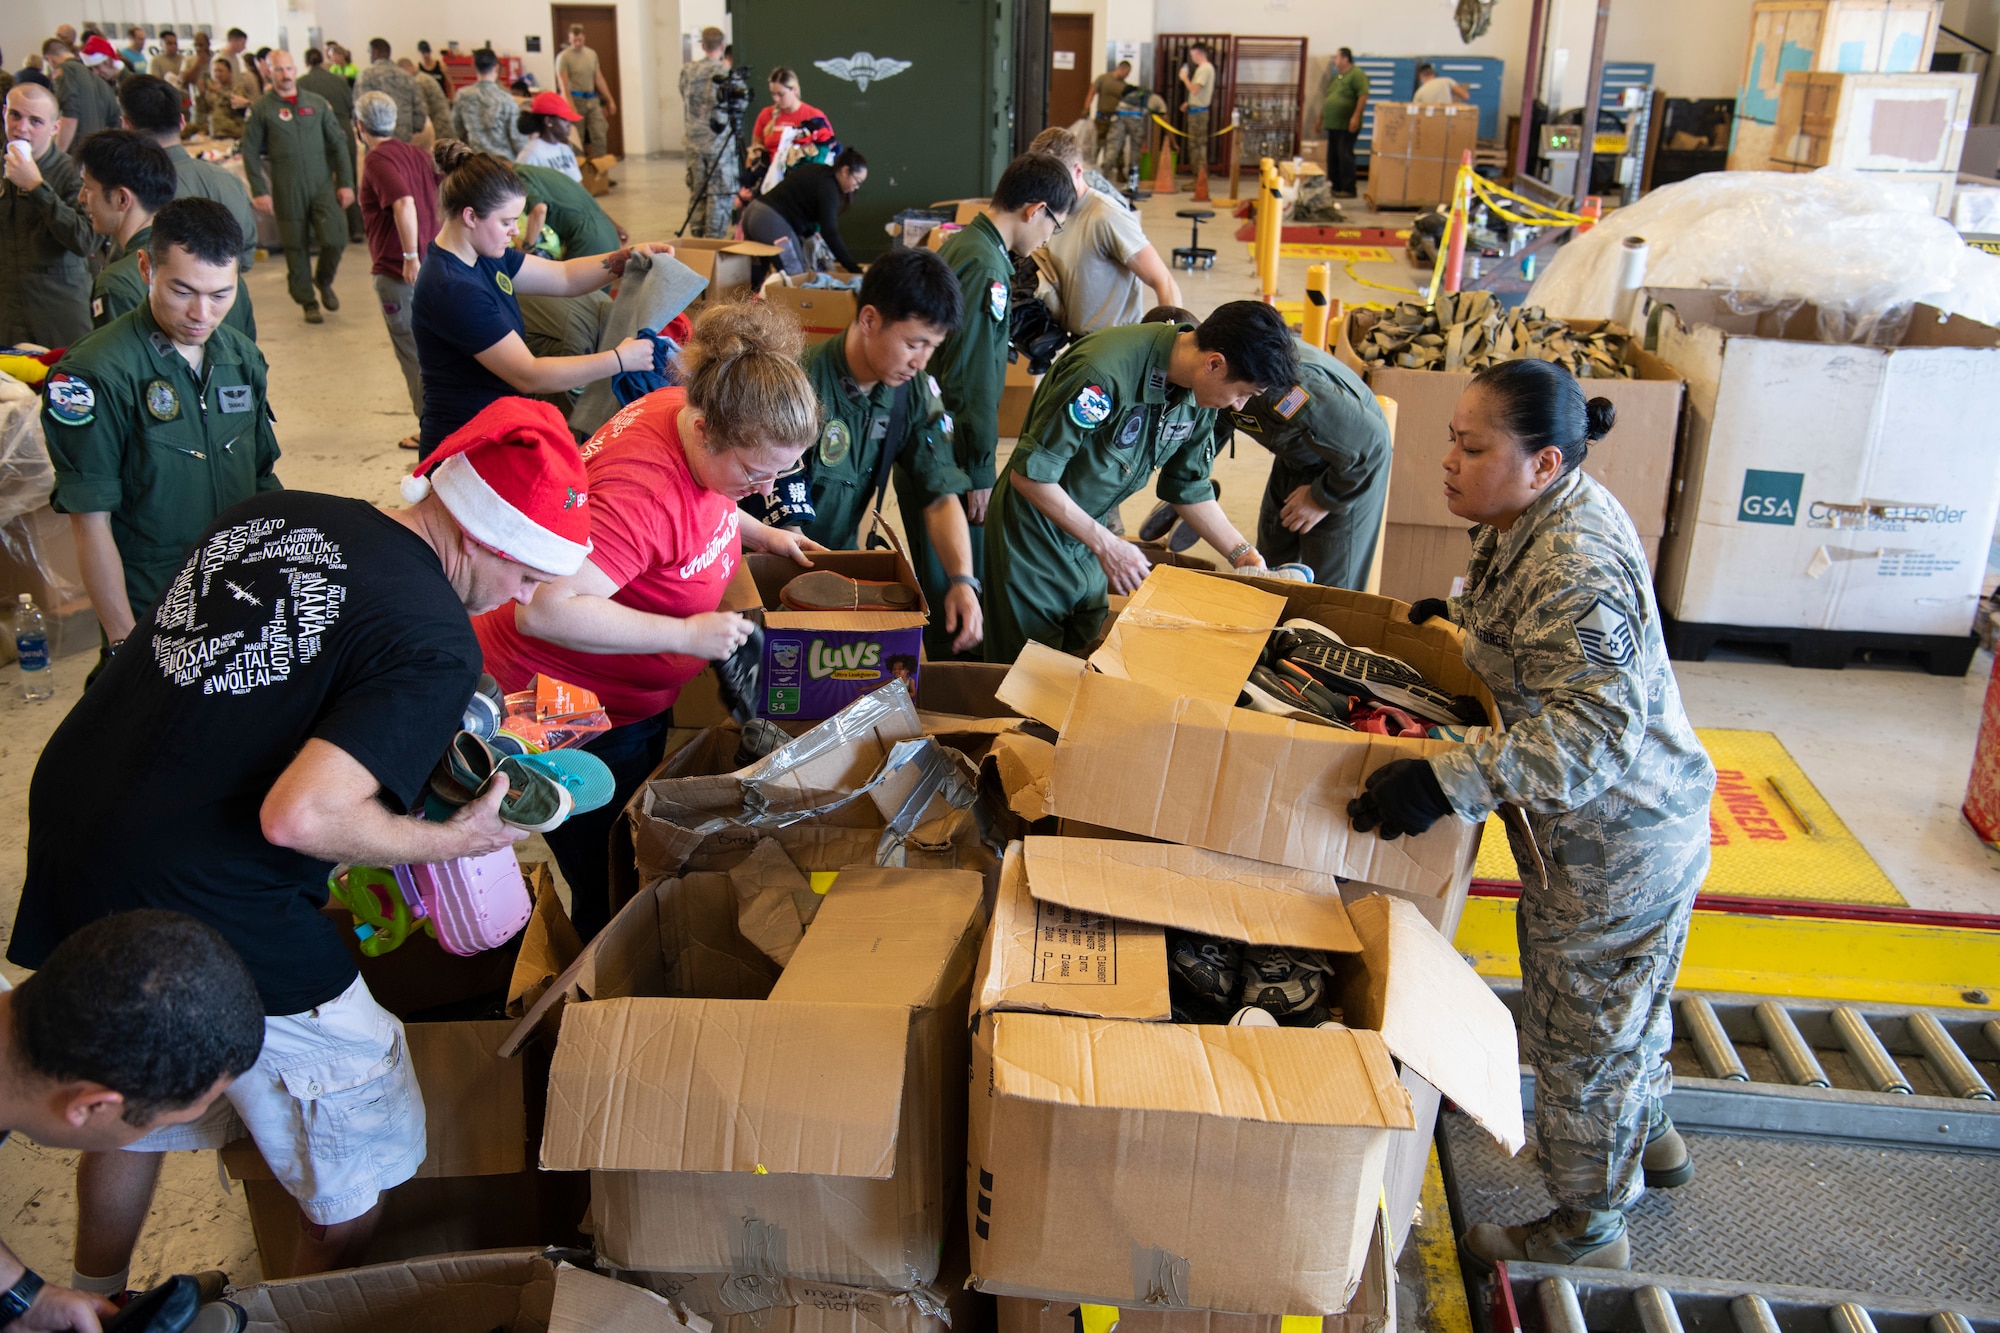 U.S. Air Force Master Sgt. Eileen Quichocho, an air transportation specialist with the U.S. Air Force Reserve’s 44th Aerial Port Squadron, stacks donations for volunteers to pack into airdrop bundles Dec. 8, 2018, during Operation Christmas Drop at Andersen Air Force Base, Guam. Operation Christmas Drop is a U.S. Air Force-led trilateral training event that includes air support from the Japanese Air Self Defense Force and Royal Australian Air Force to airdrop supplies to the Commonwealth of the Northern Marianas, Federated States of Micronesia, and the Republic of Palau. (U.S. Air Force photo by Jerry R. Bynum)